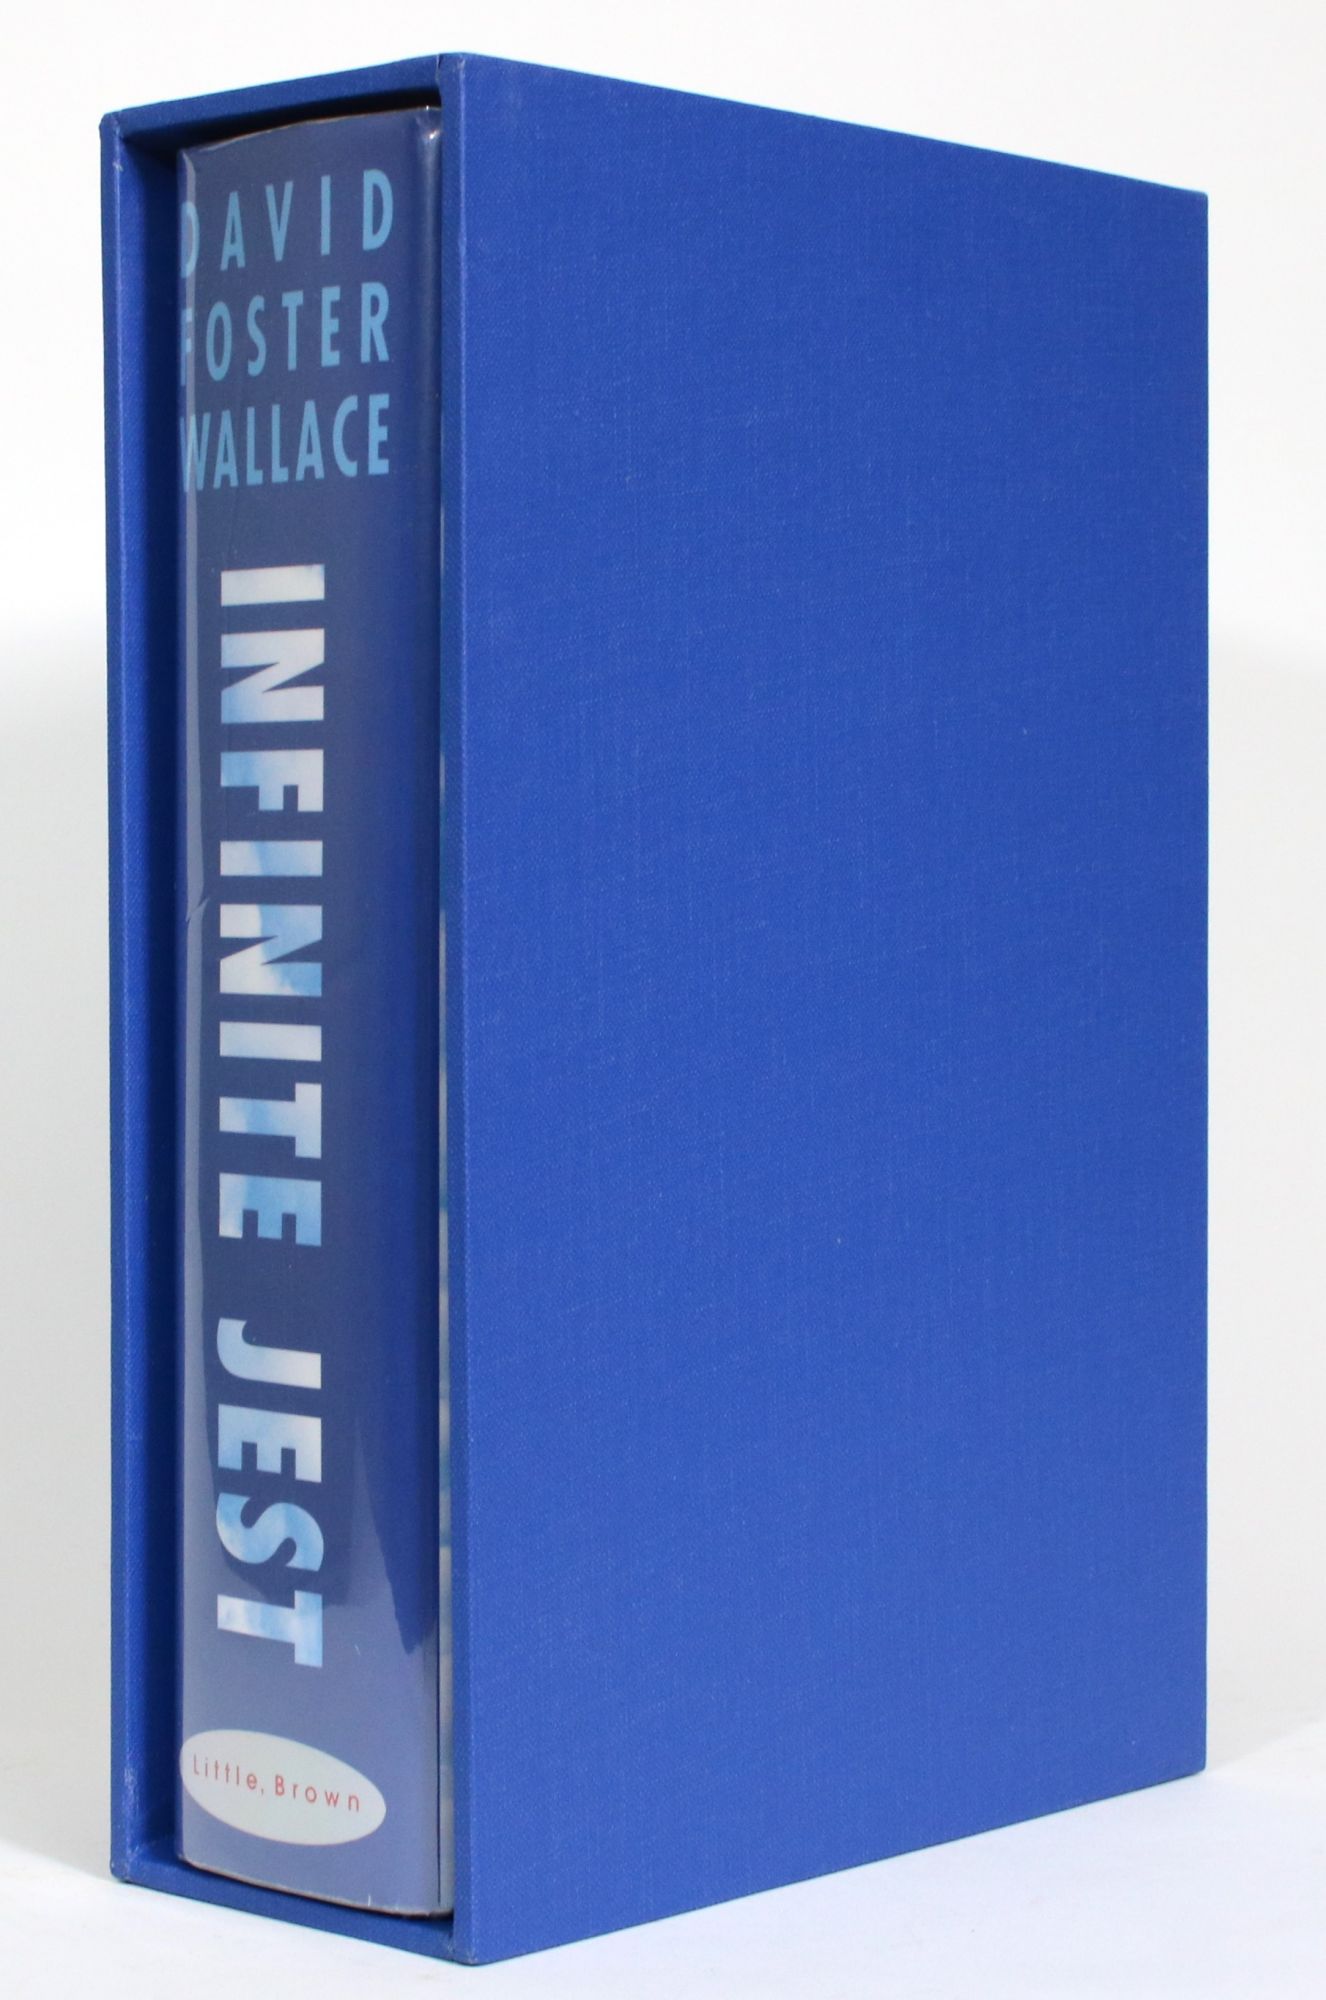 Infinite Jest by Wallace, David Foster: Fine Hardcover (1996) 1st Edition.